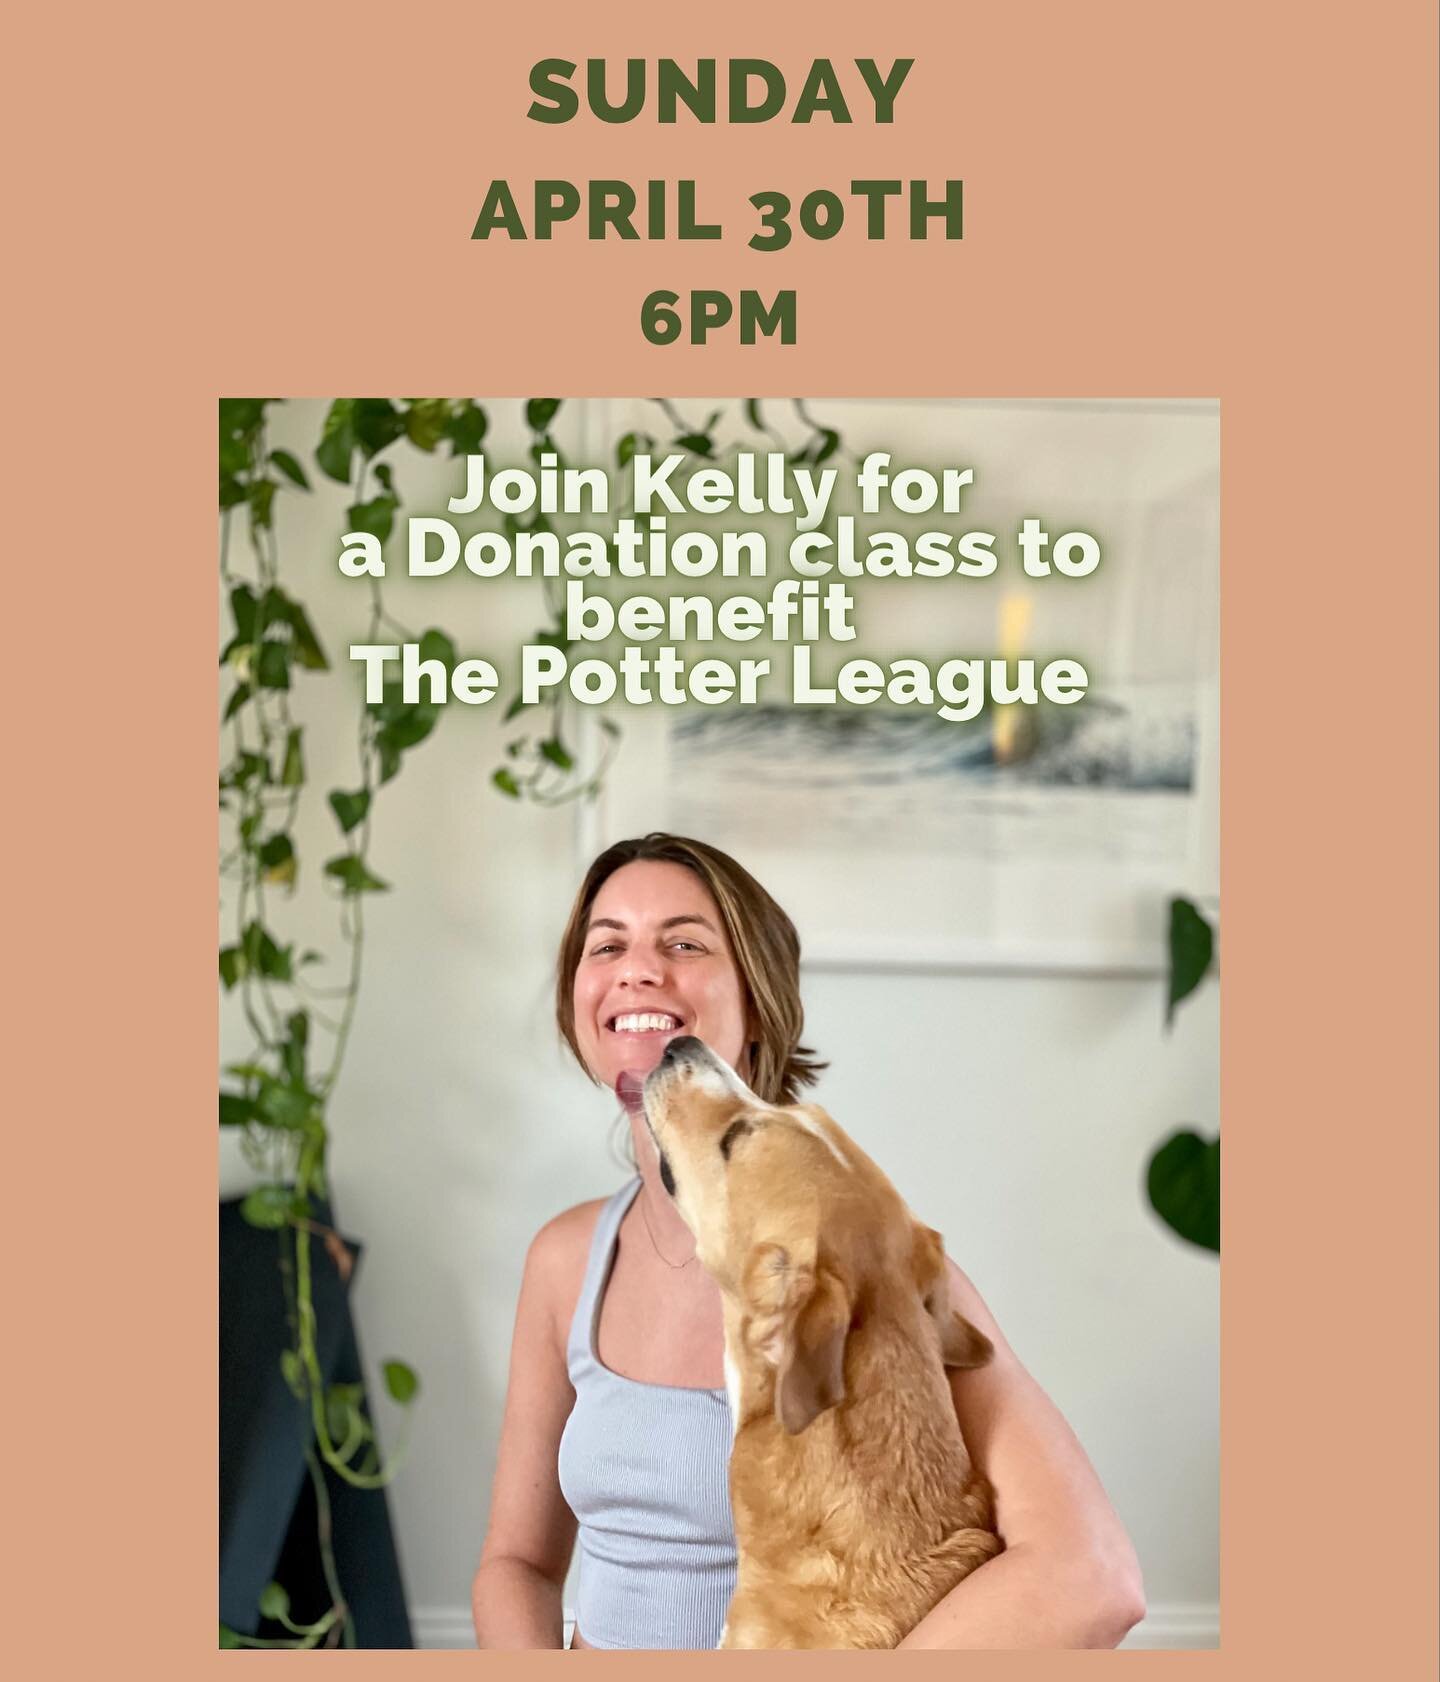 🐾This Sunday at 6pm🐾

Join Kelly on National Adopt A Pet Day for a donation class to support The Potter League, our local non-profit animal shelter where Kelly is a regular volunteer 💜

Cash or check donations will be collected at the studio befor